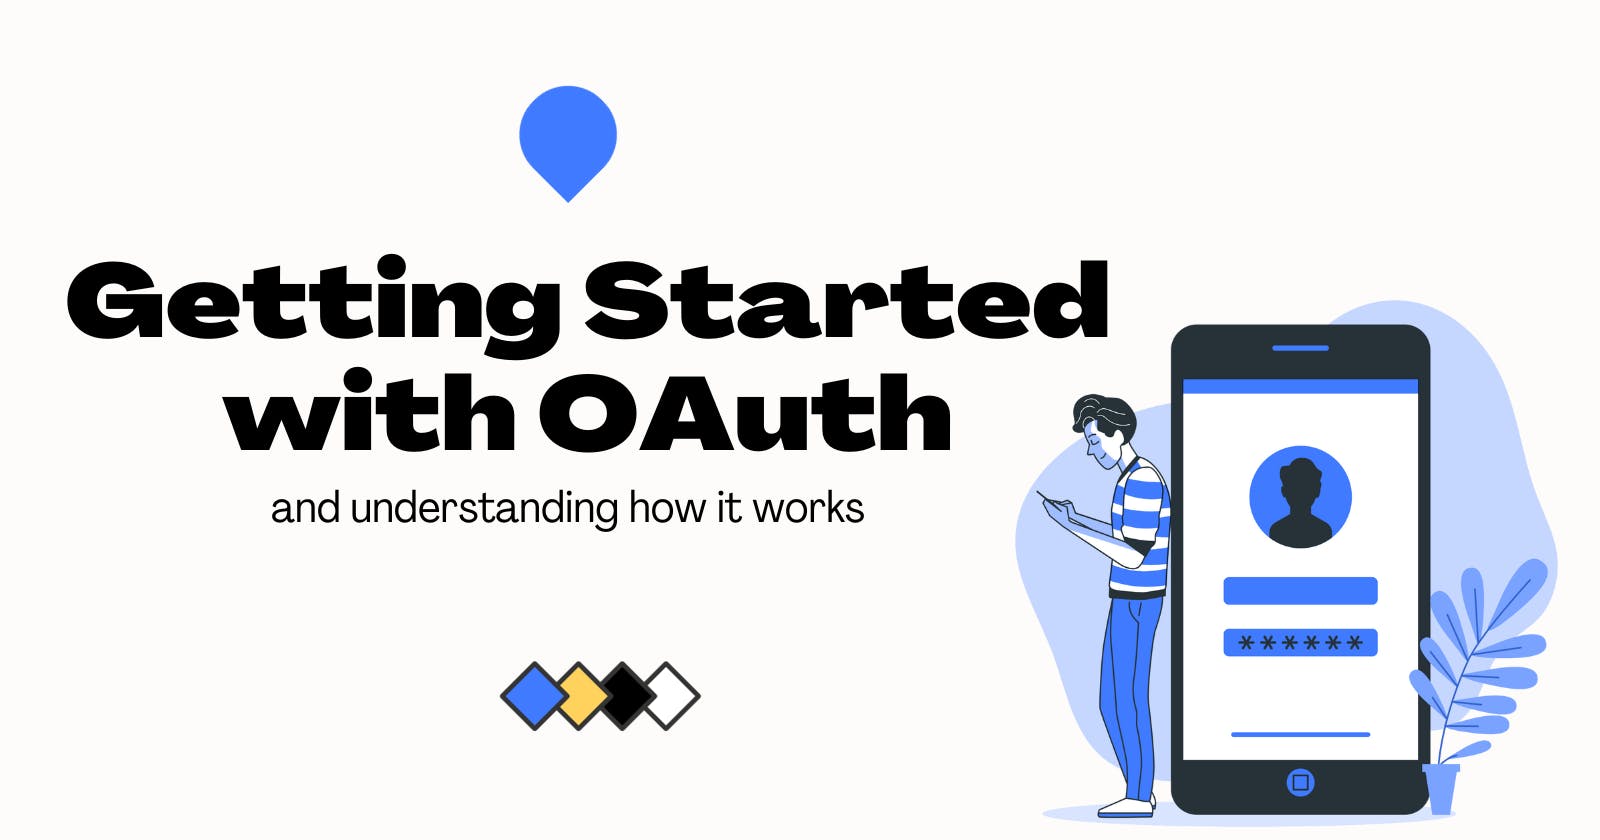 Getting started with OAuth and Understanding how it works